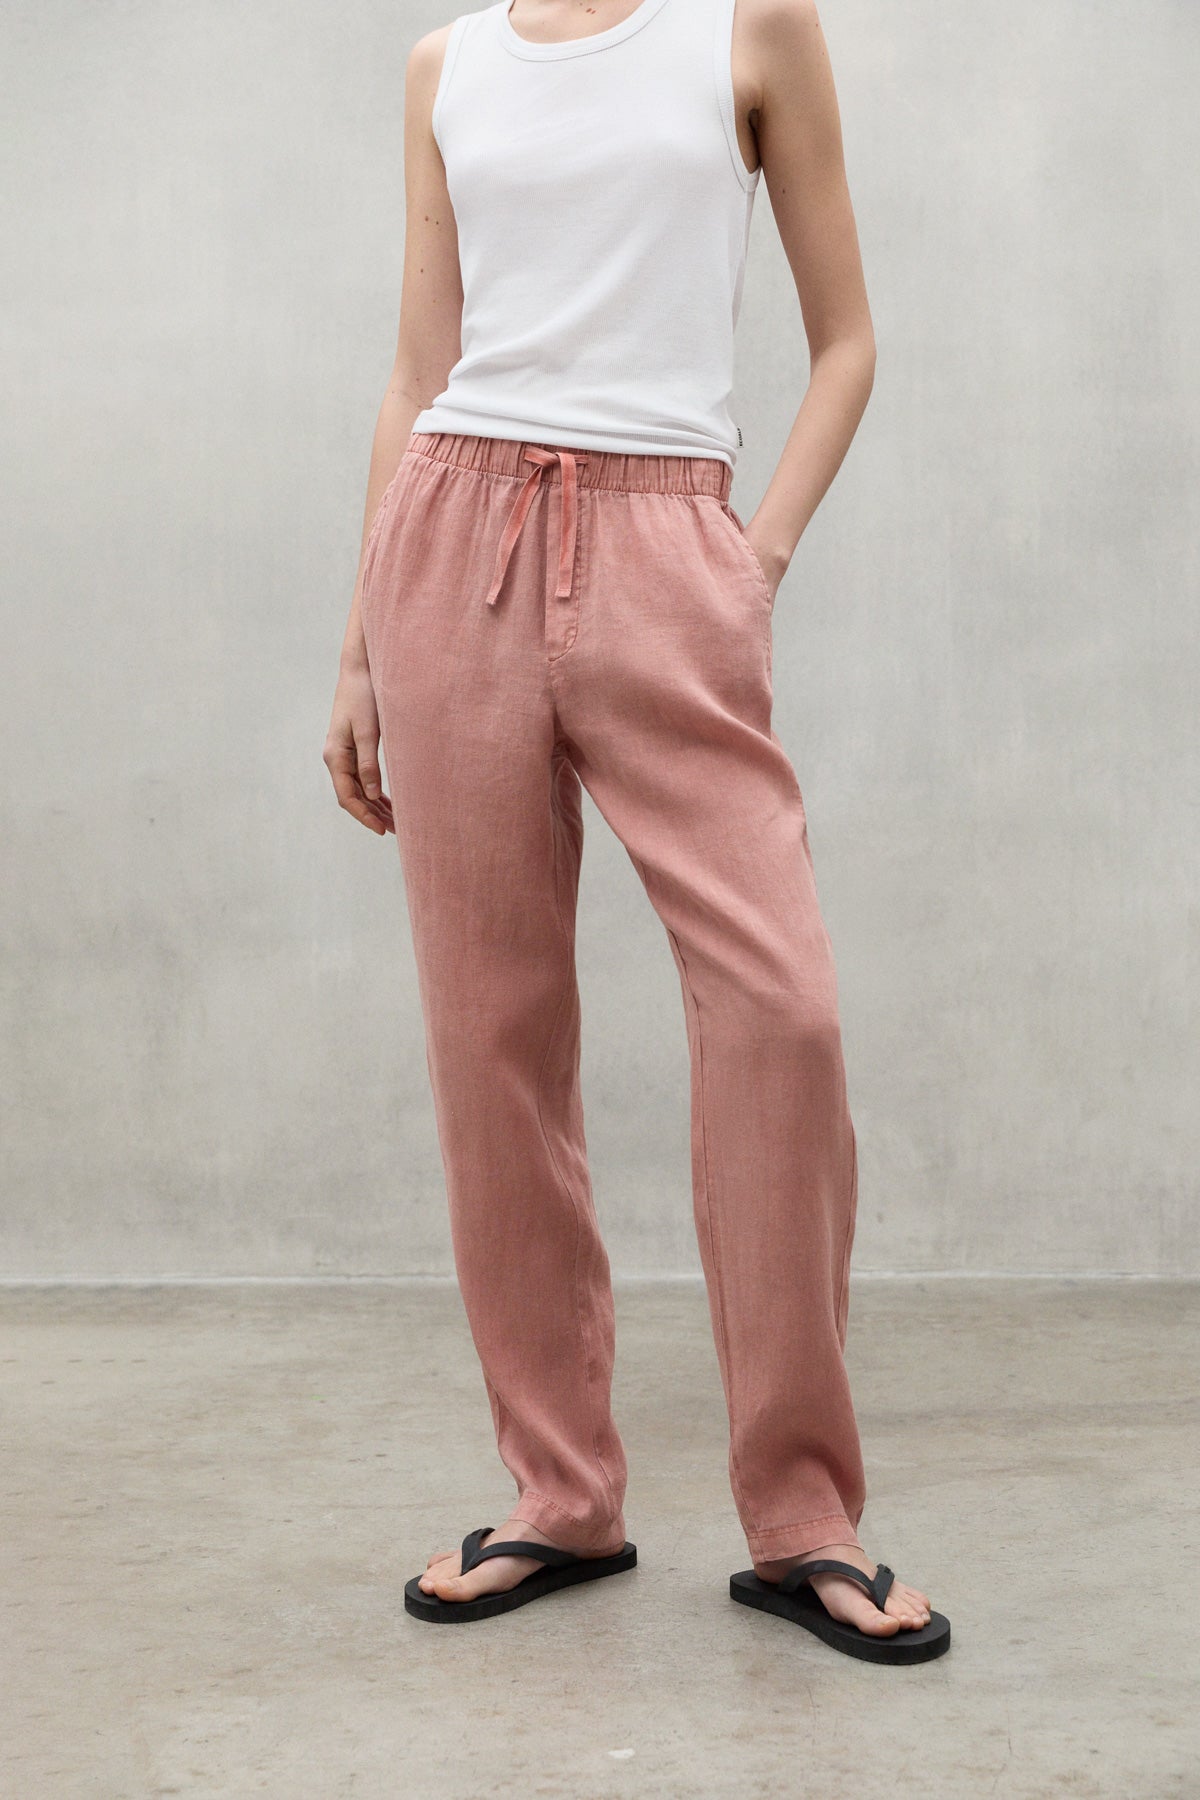 PINK INDO LINEN TROUSERS